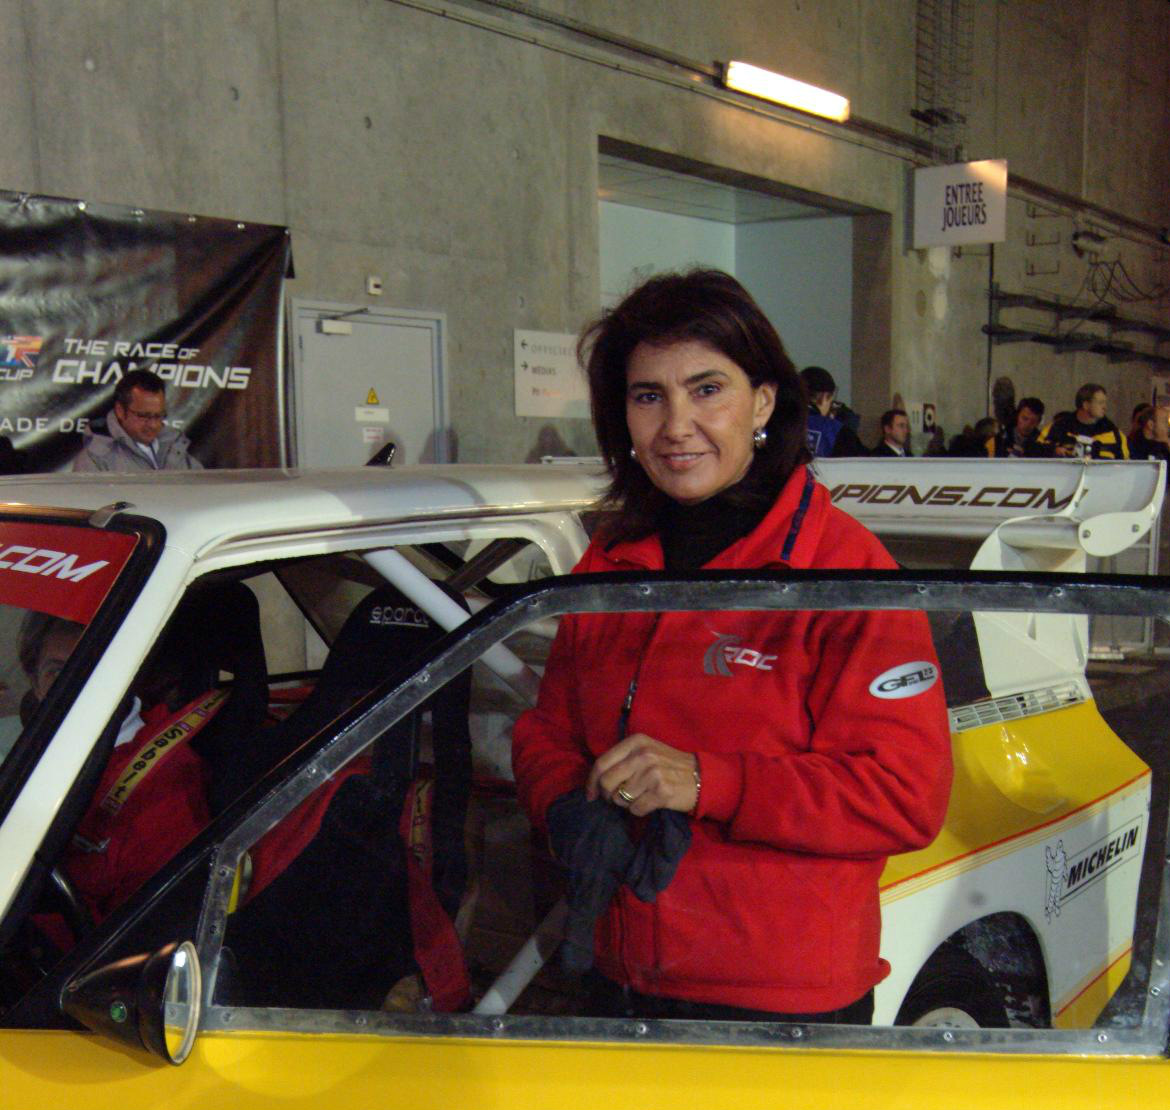 She's one of the fastest drivers to compete in the World Rally Championship but what's her name?